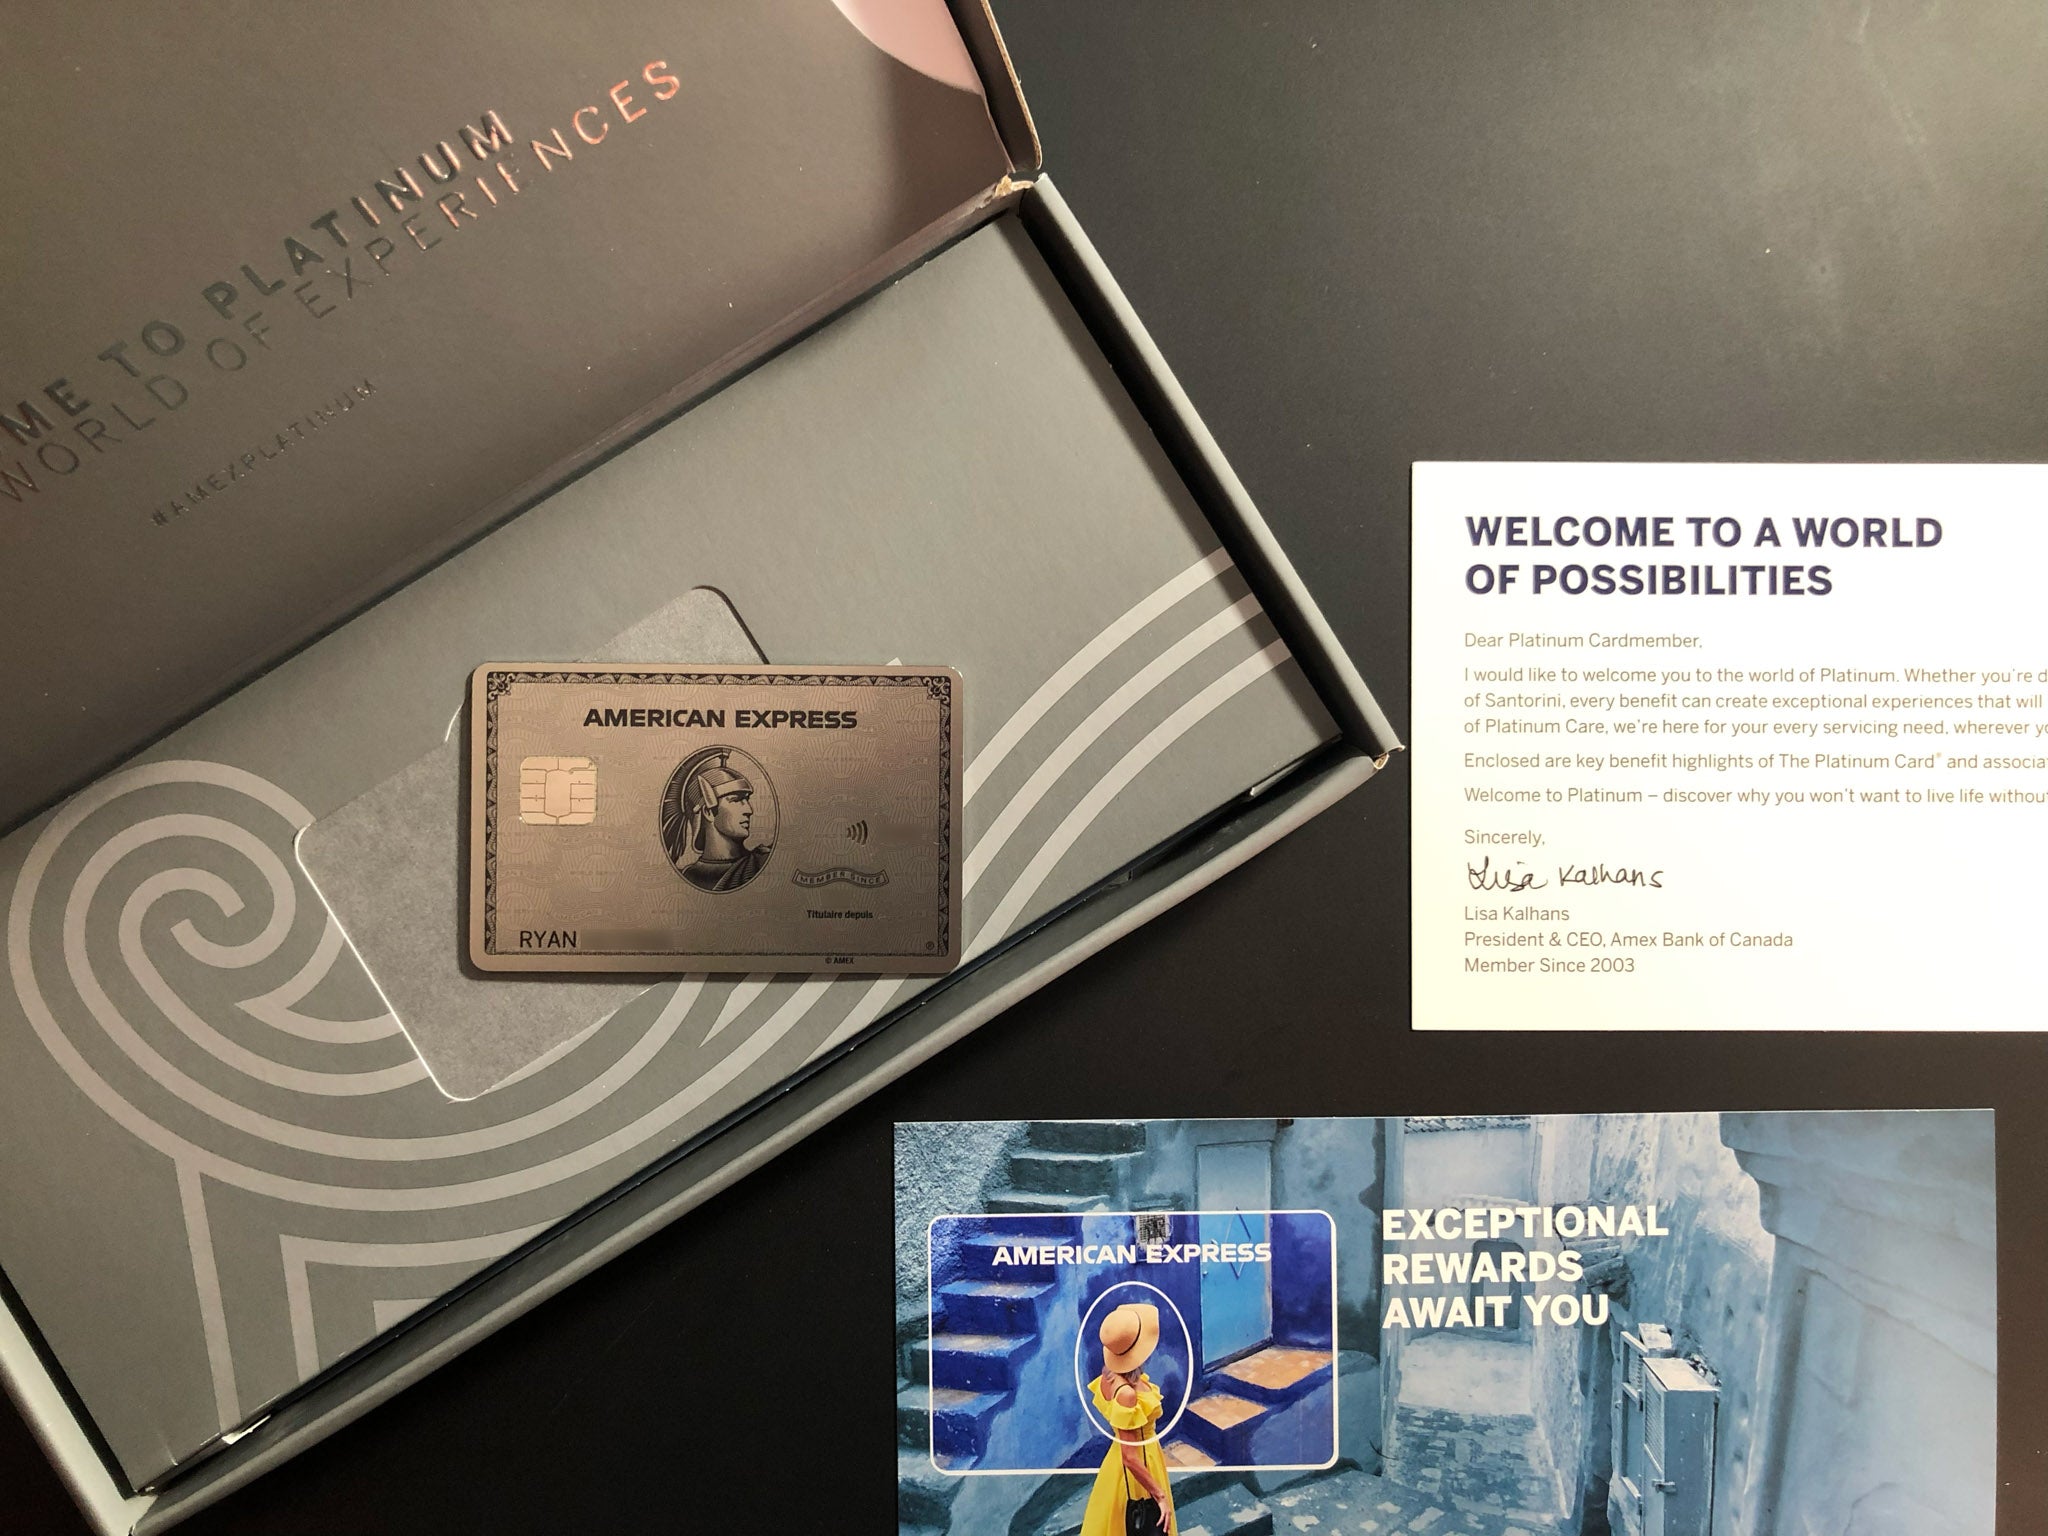 7 Reasons to Get the American Express Platinum Card